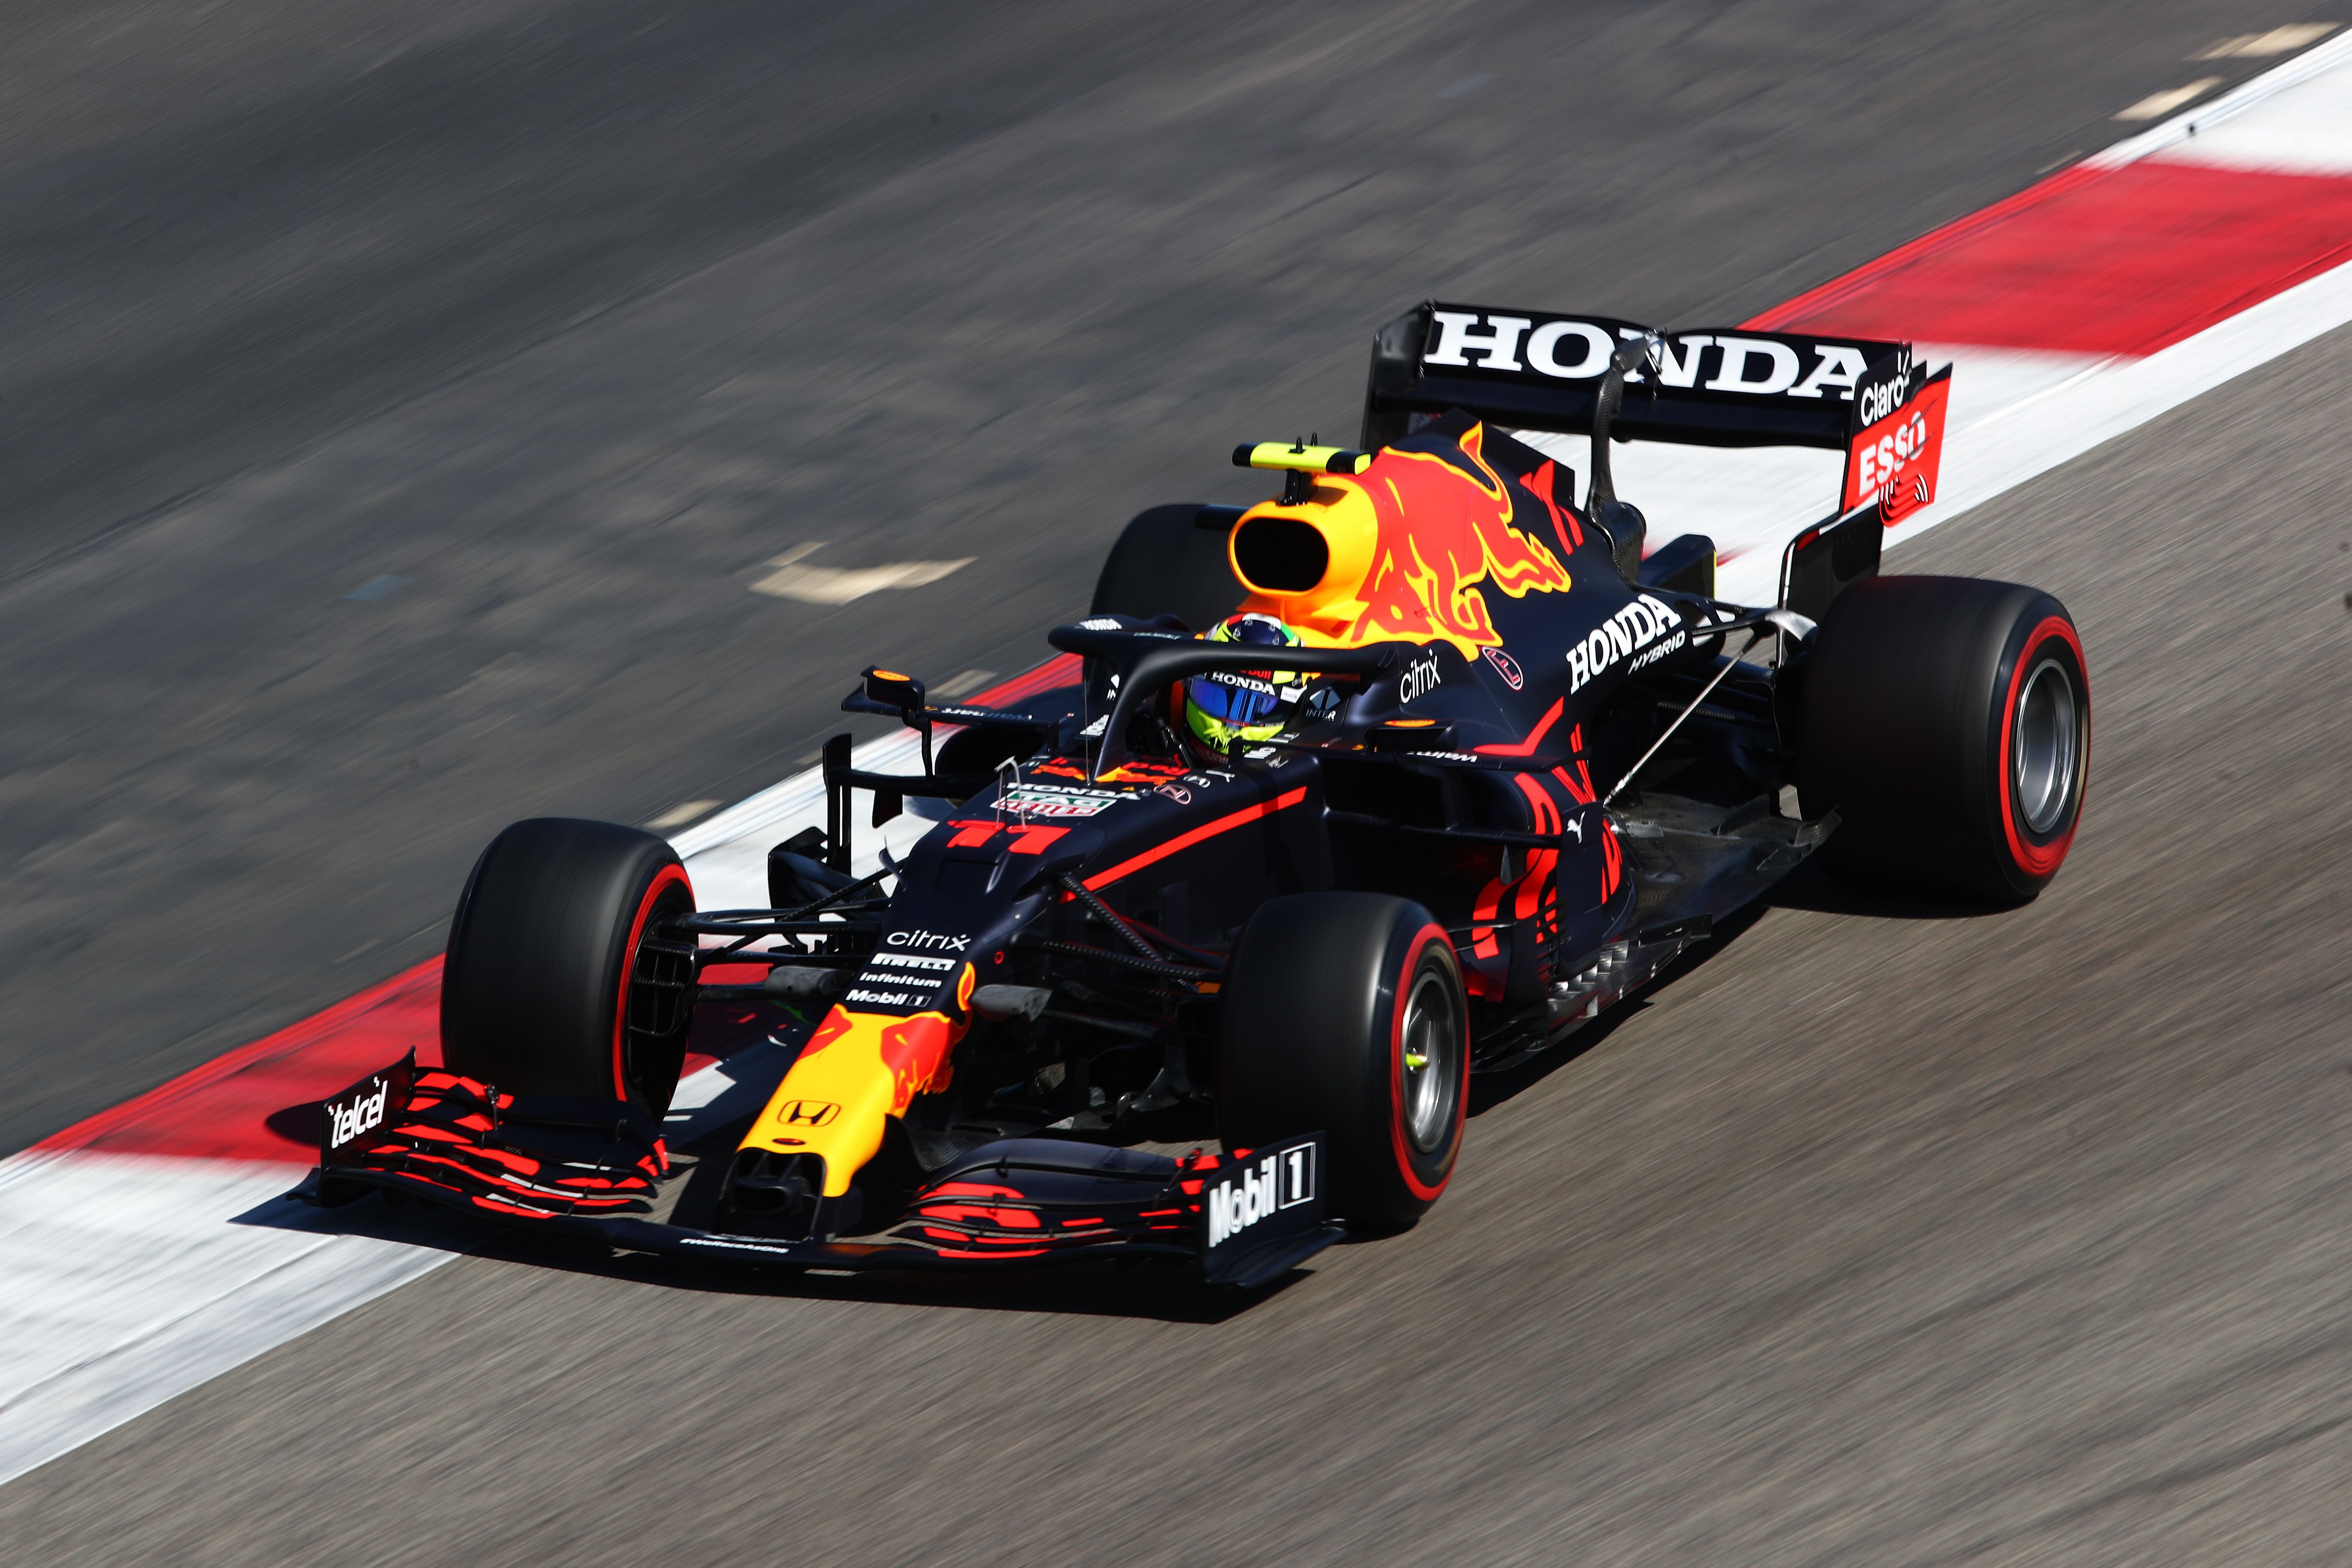 Max Verstappen, Sergio Perez looking strong for Red Bull in F1 testing